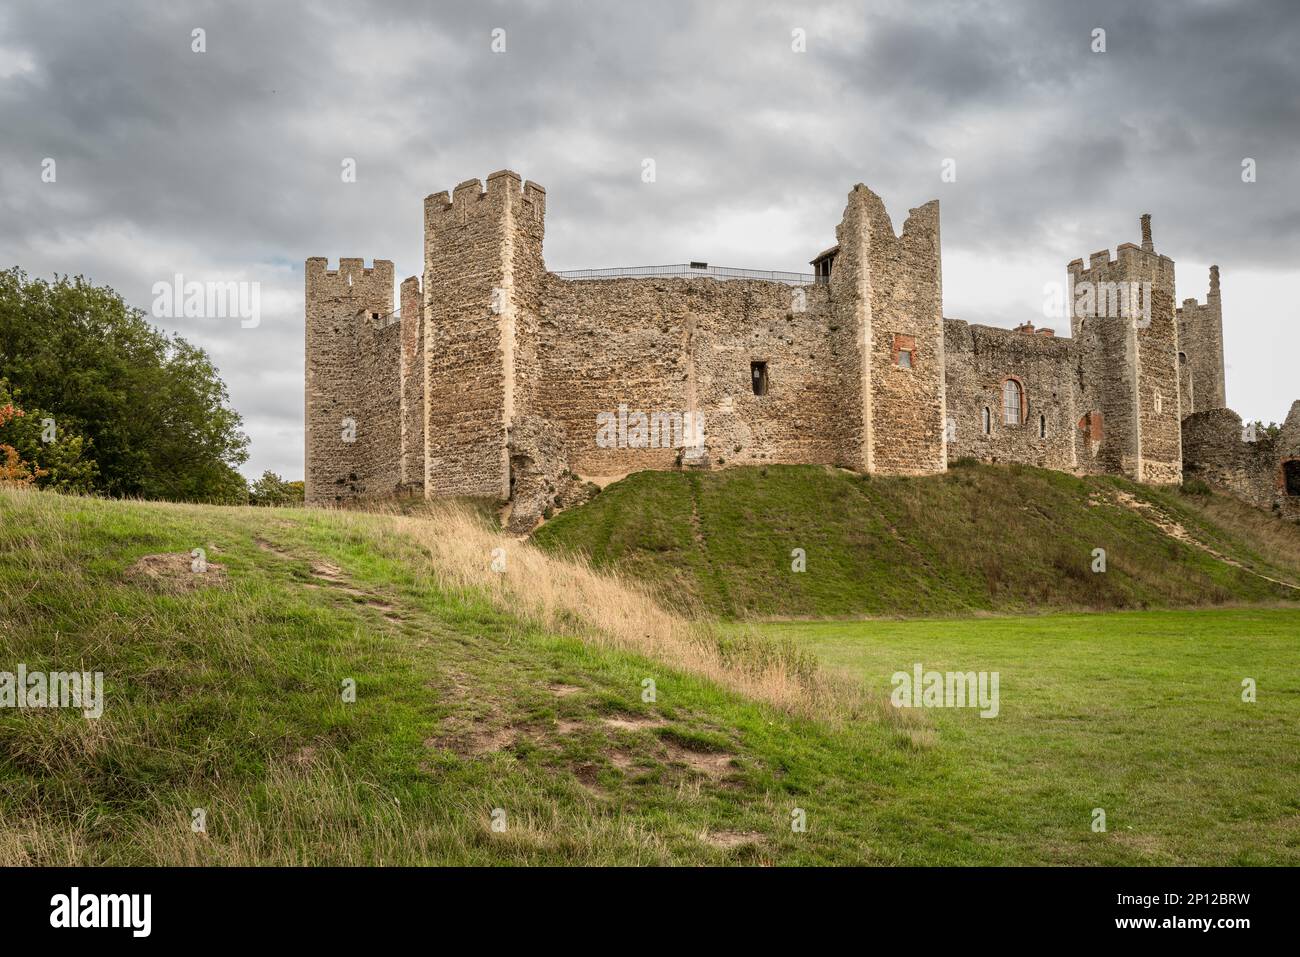 Beautiful English castle seen surrounded by lush grass mounds in the English countryside. Stock Photo